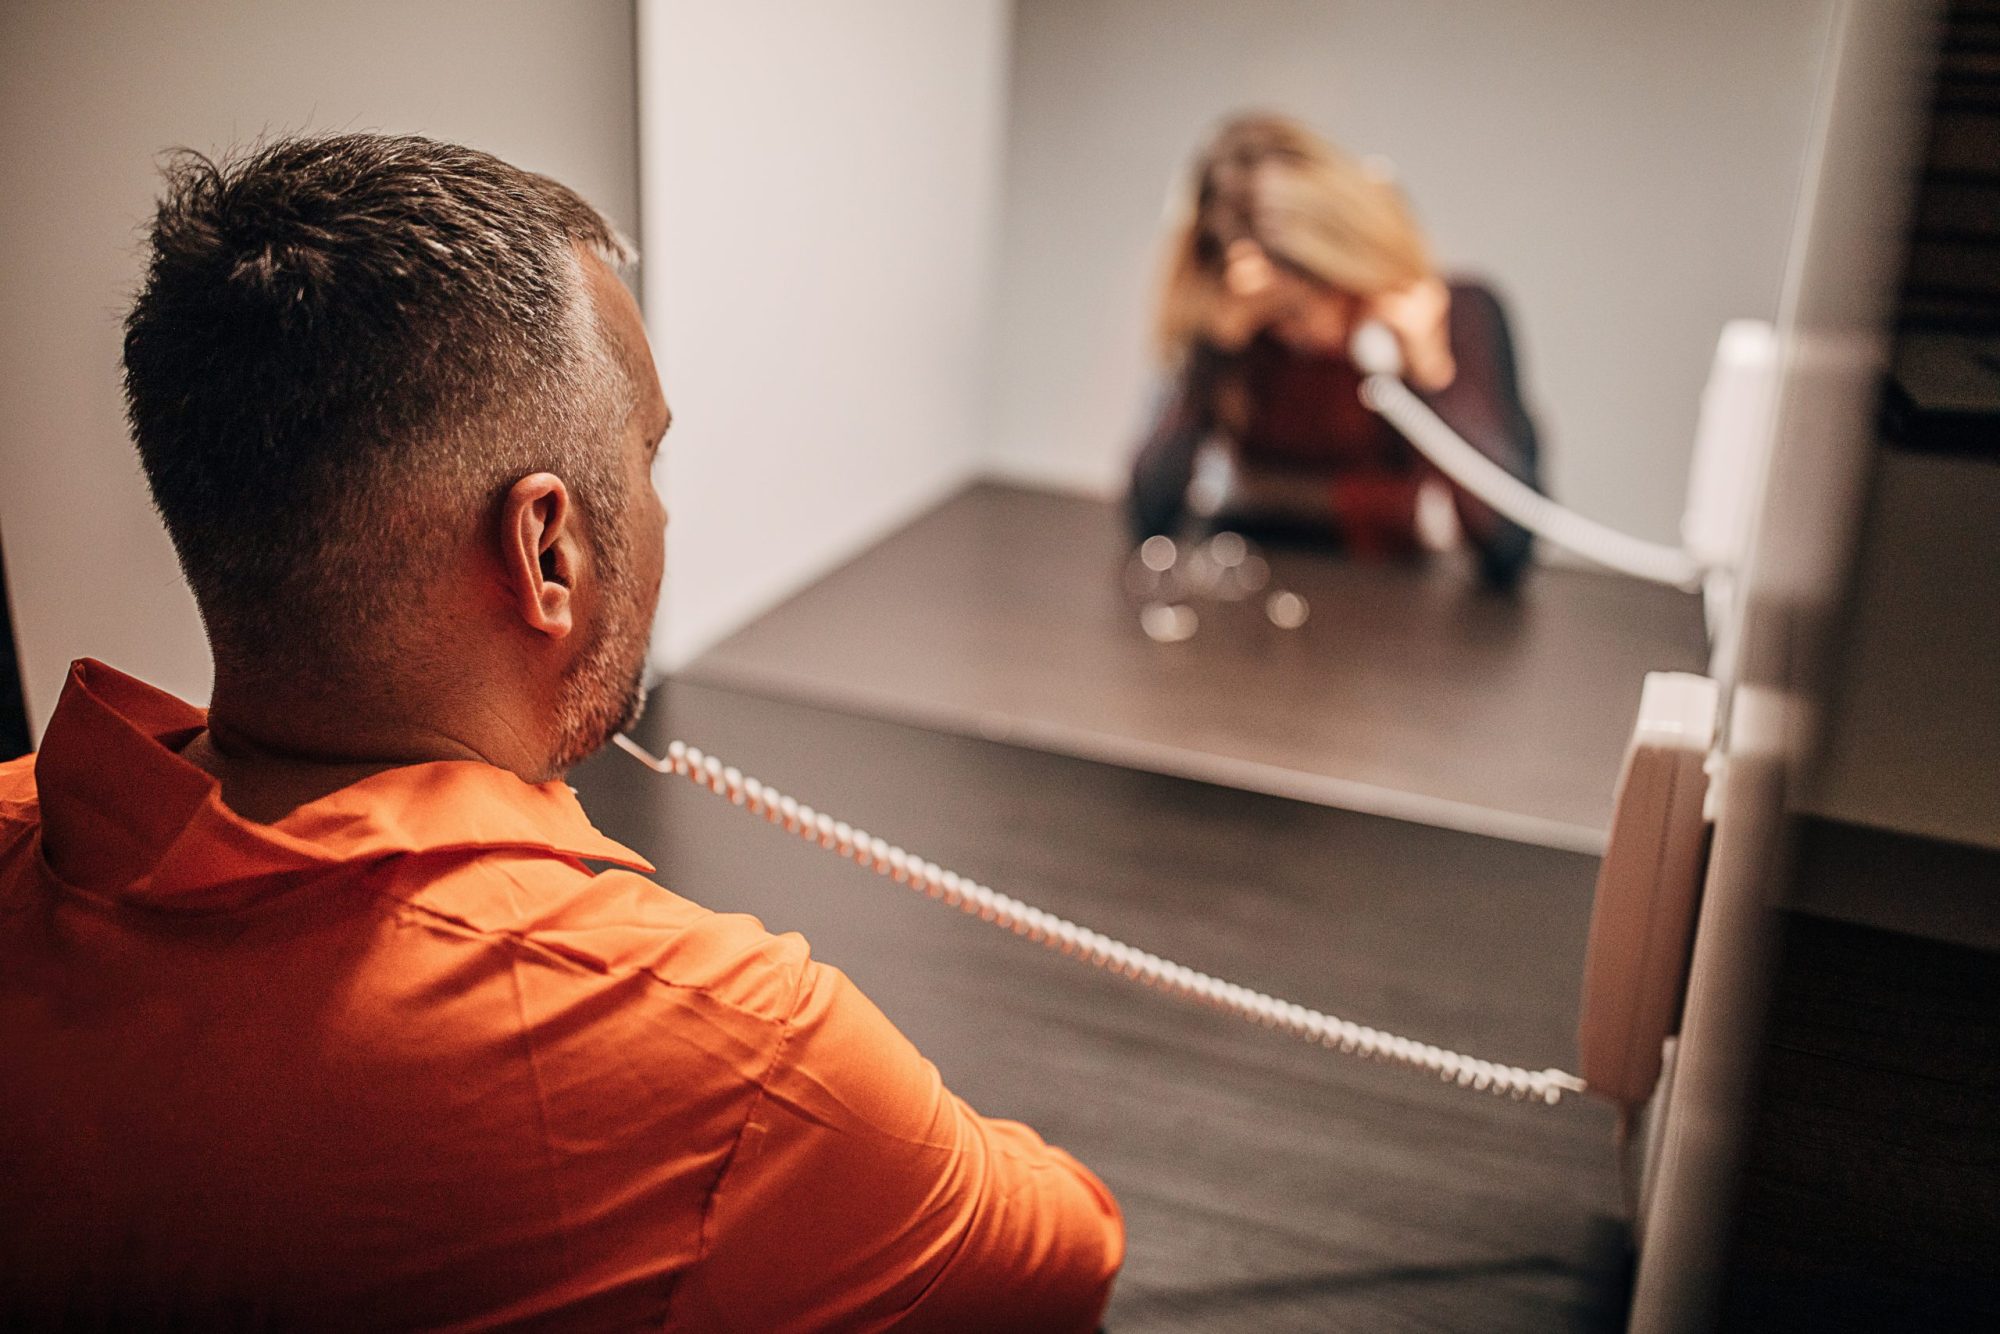 Male prisoner talking over the phone with his wife in prison visit room.